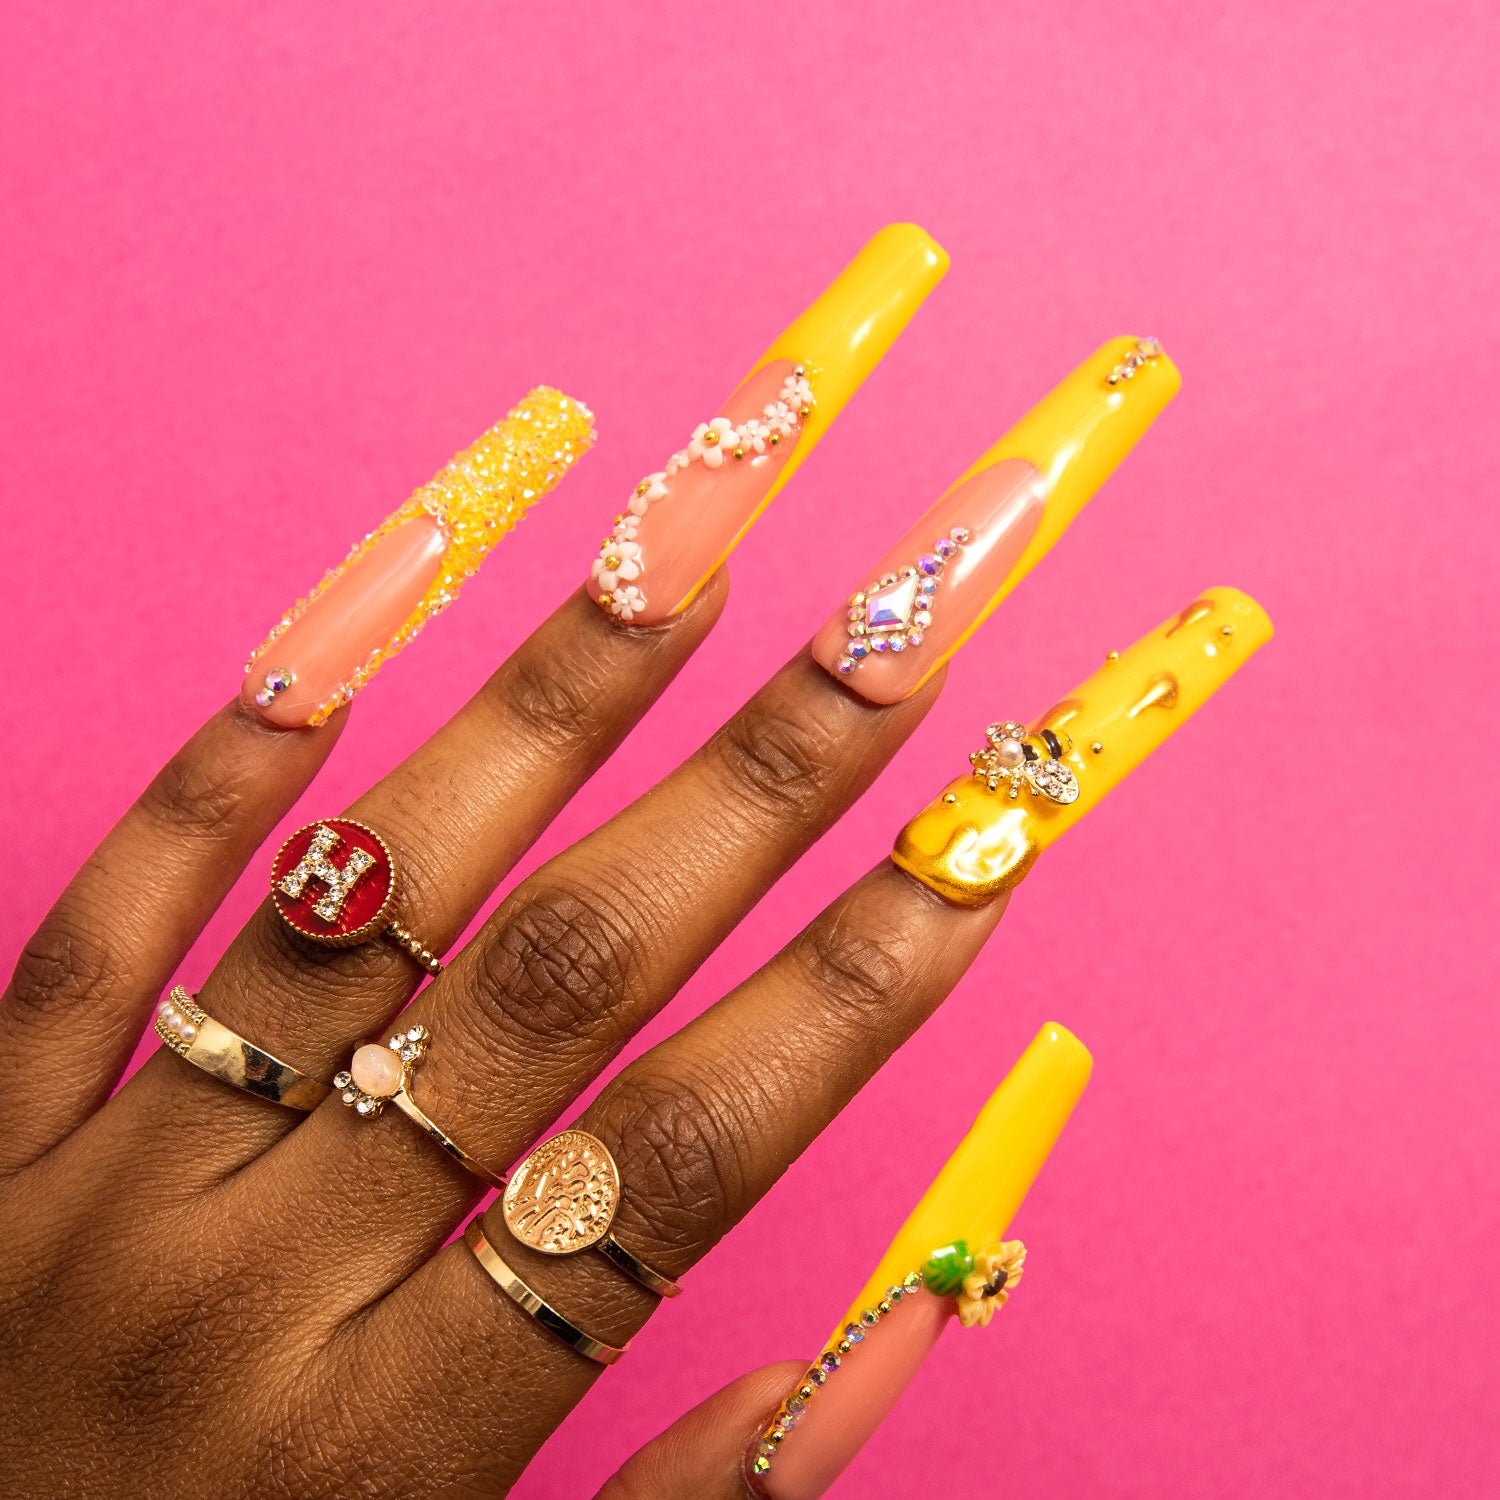 Hand with long square-shaped press-on acrylic nails in bright yellow with sunflower patterns, bee accents, and jeweled decorations against a pink background. Multiple rings on fingers, featuring designs like an 'H' and a flower.